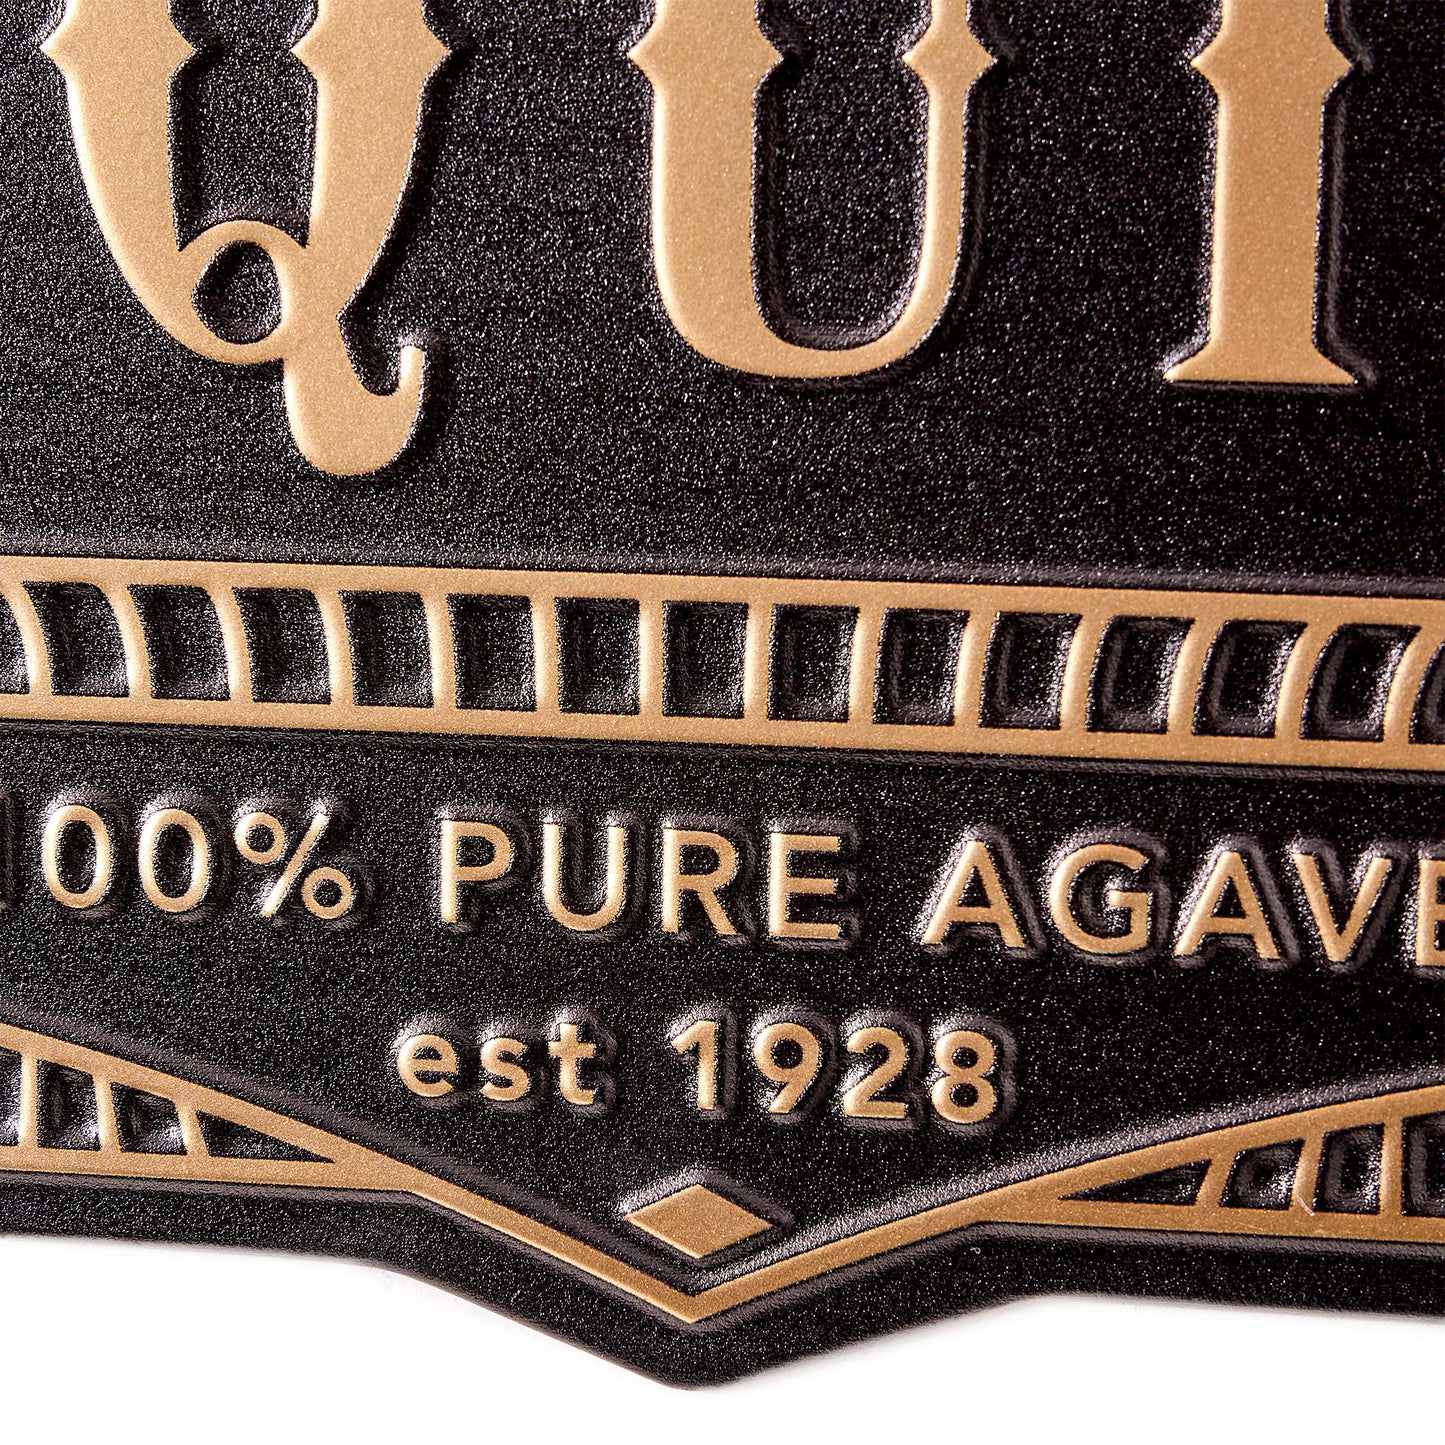 Tequila Embossed Metal Bar Sign